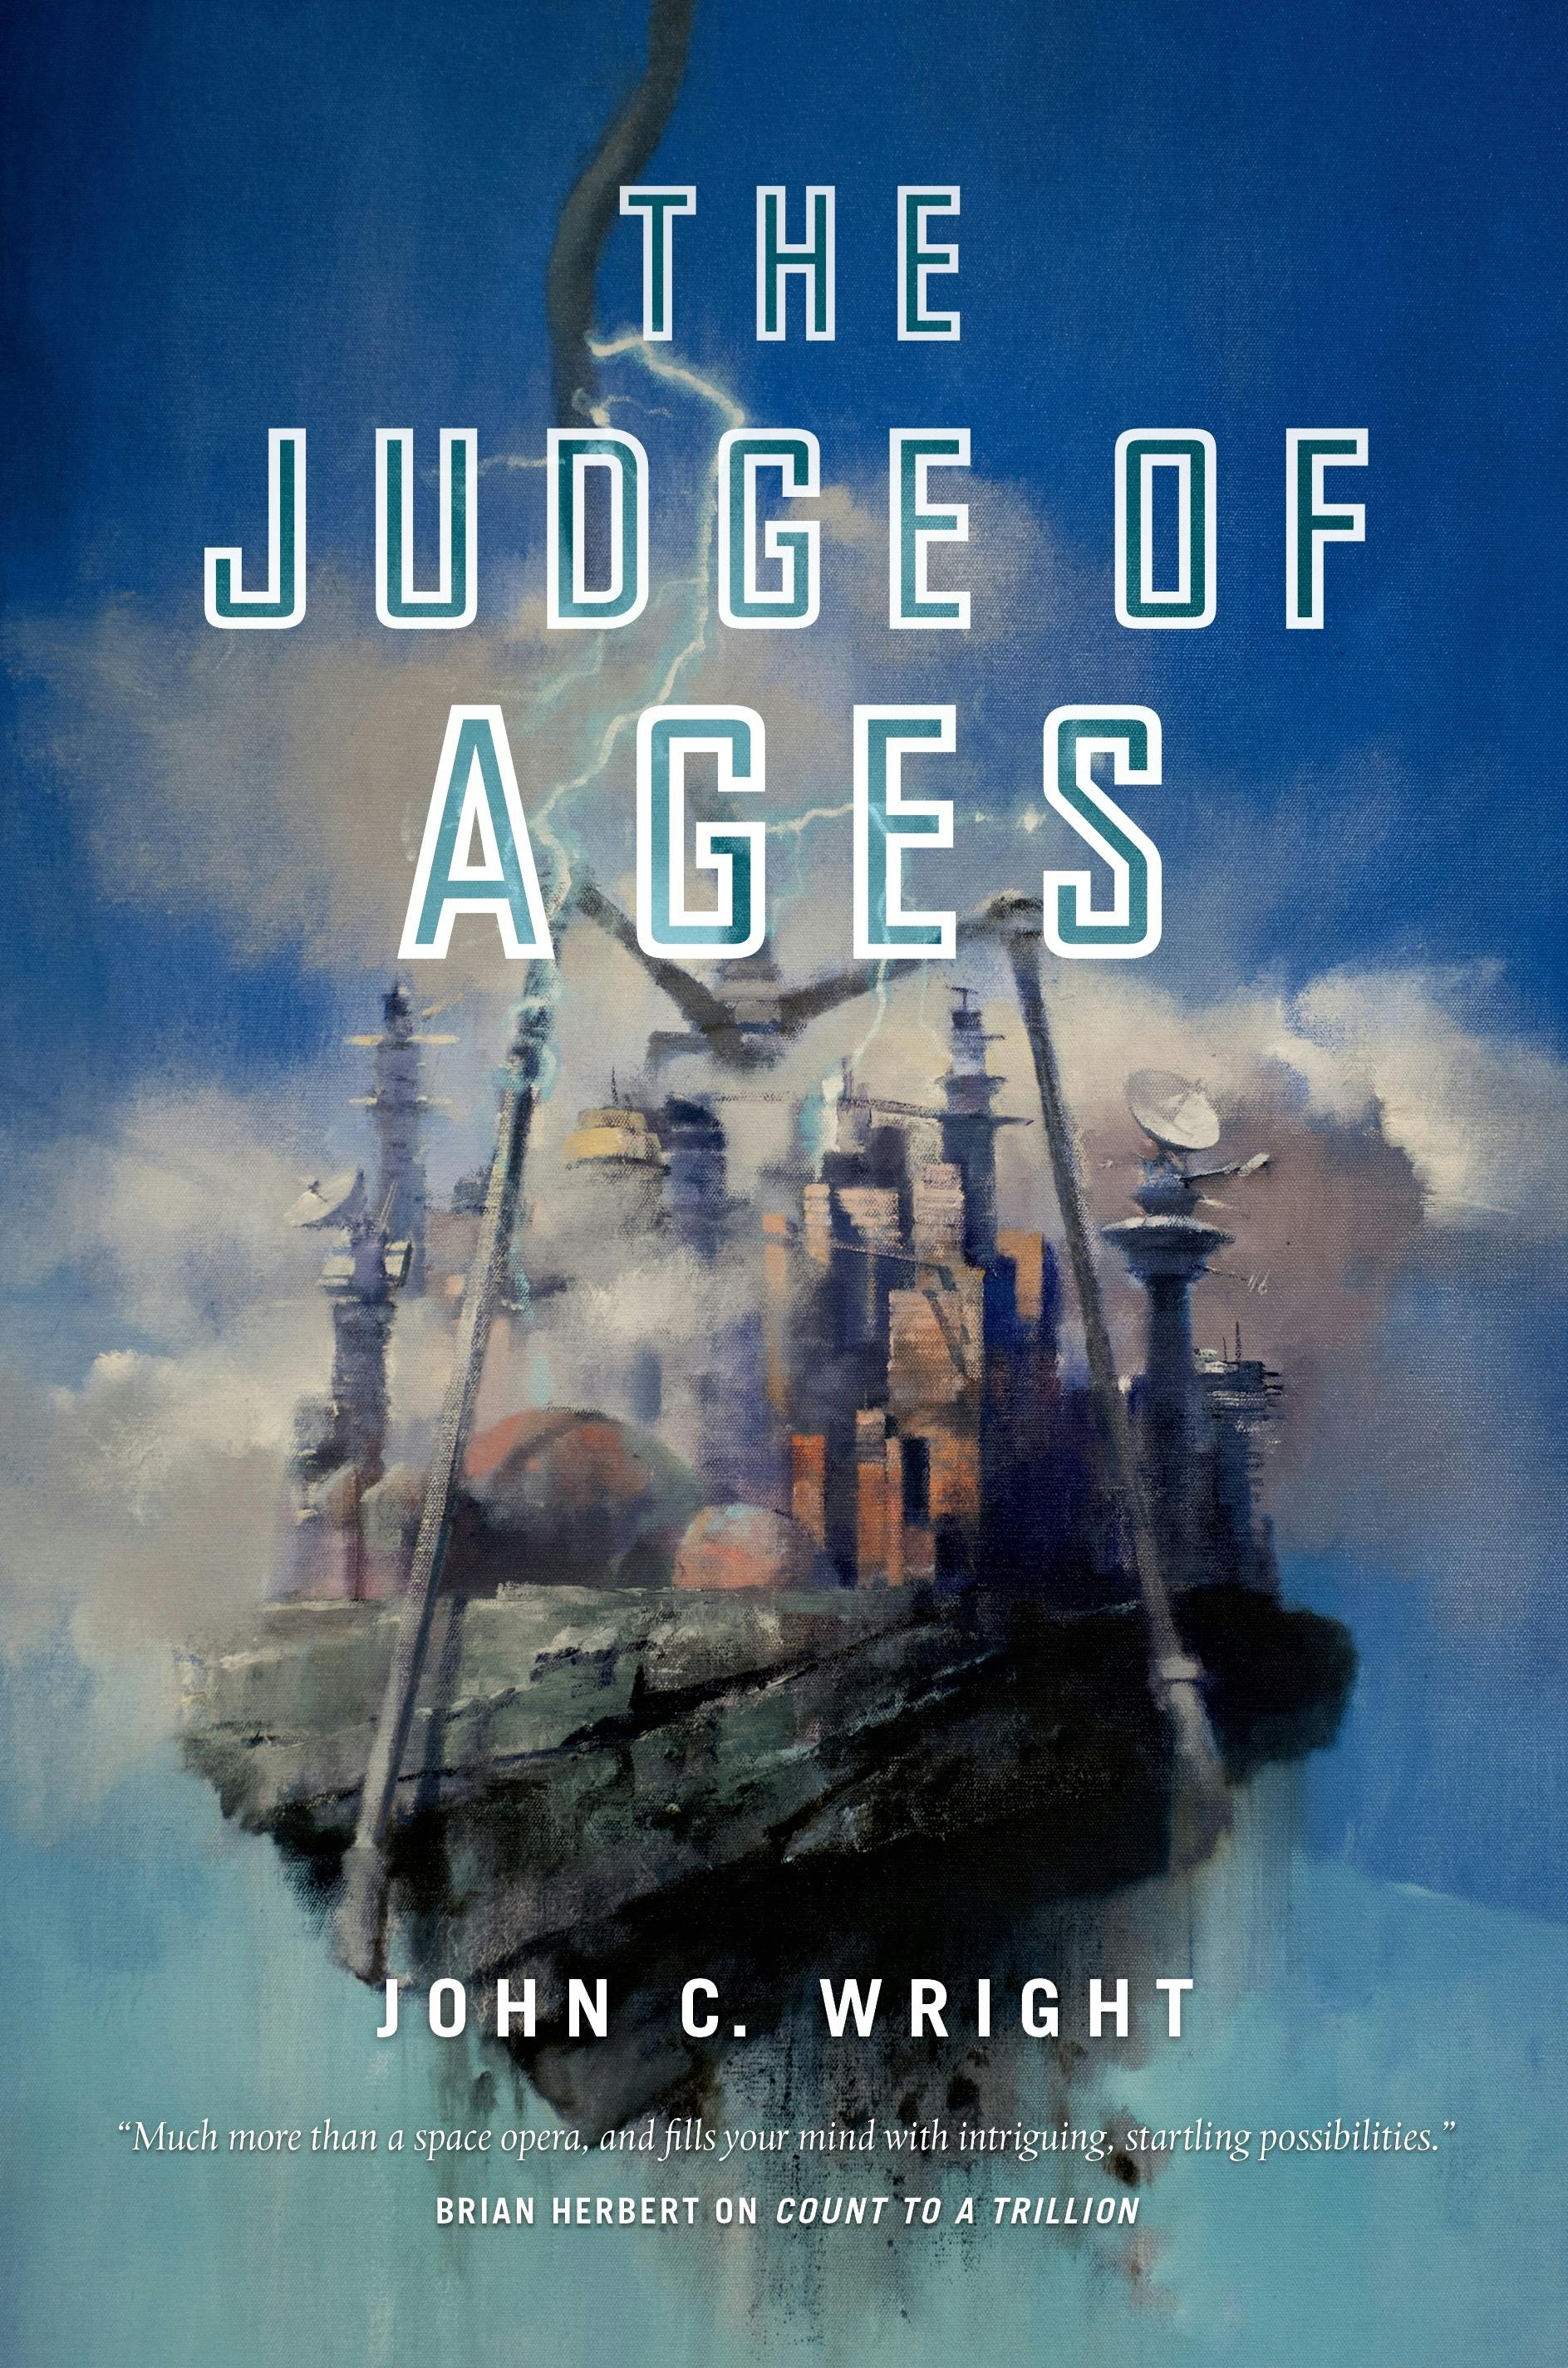 Cover for the book titled as: The Judge of Ages